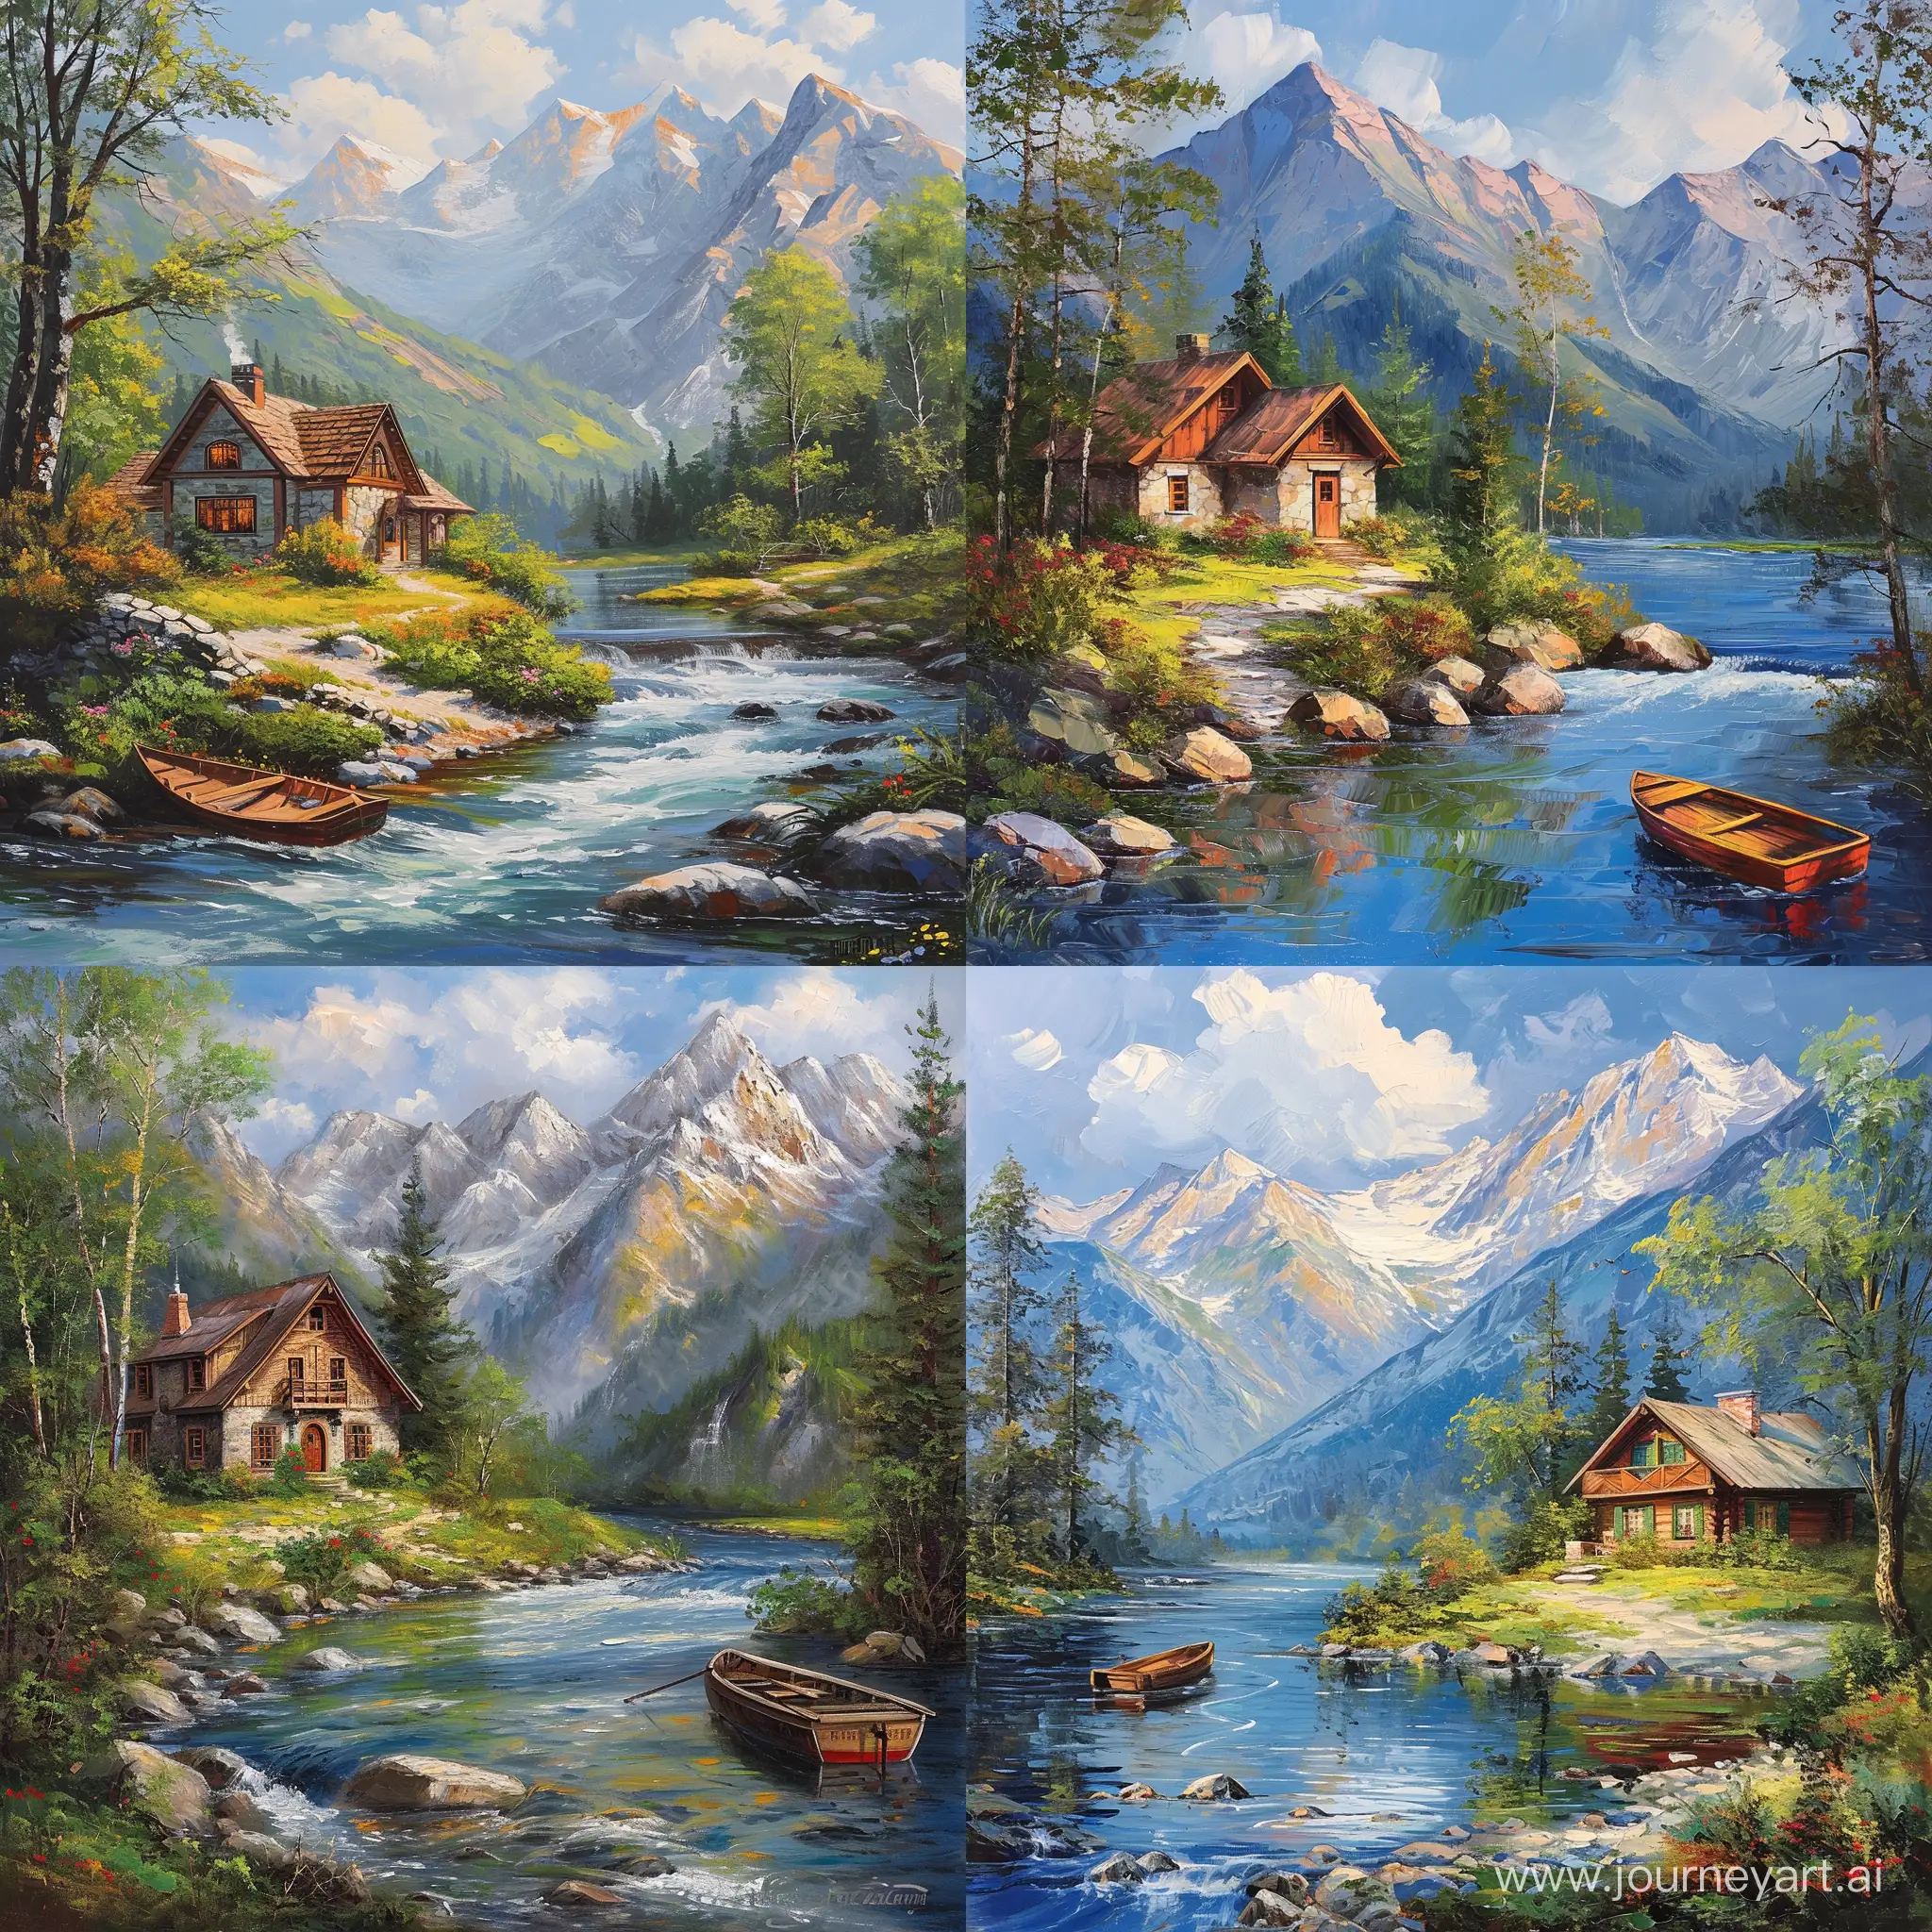 Serene-Mountain-River-House-Painting-with-Boat-Picturesque-Landscape-in-Oil